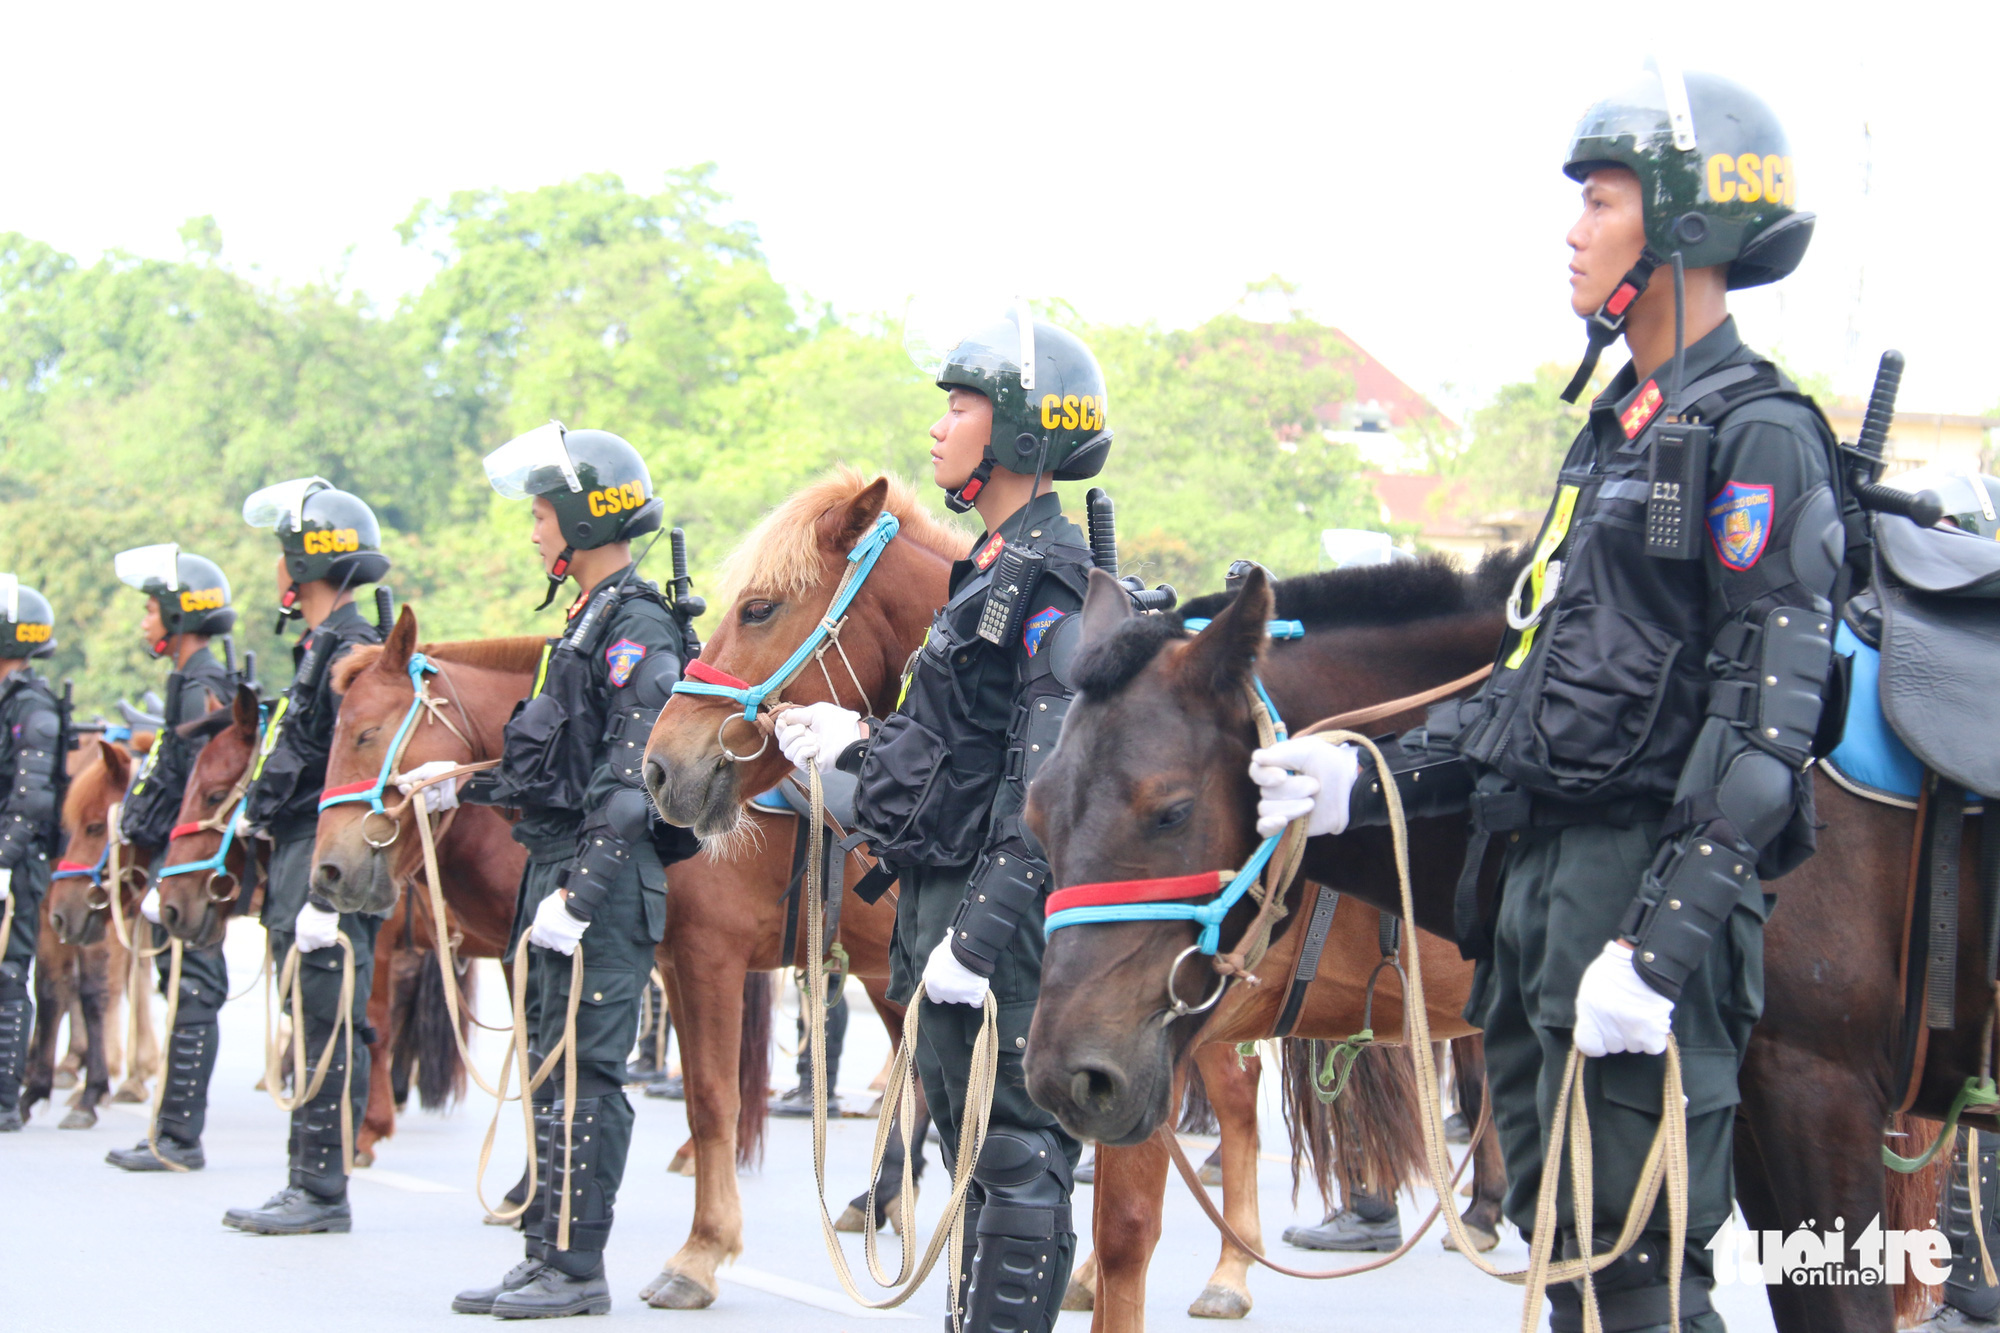 A ceremony is organized at Ba Dinh Square in Hanoi to mark the debut of Vietnam’s mounted police force on June 8, 2020. Photo: Tien Long / Tuoi Tre